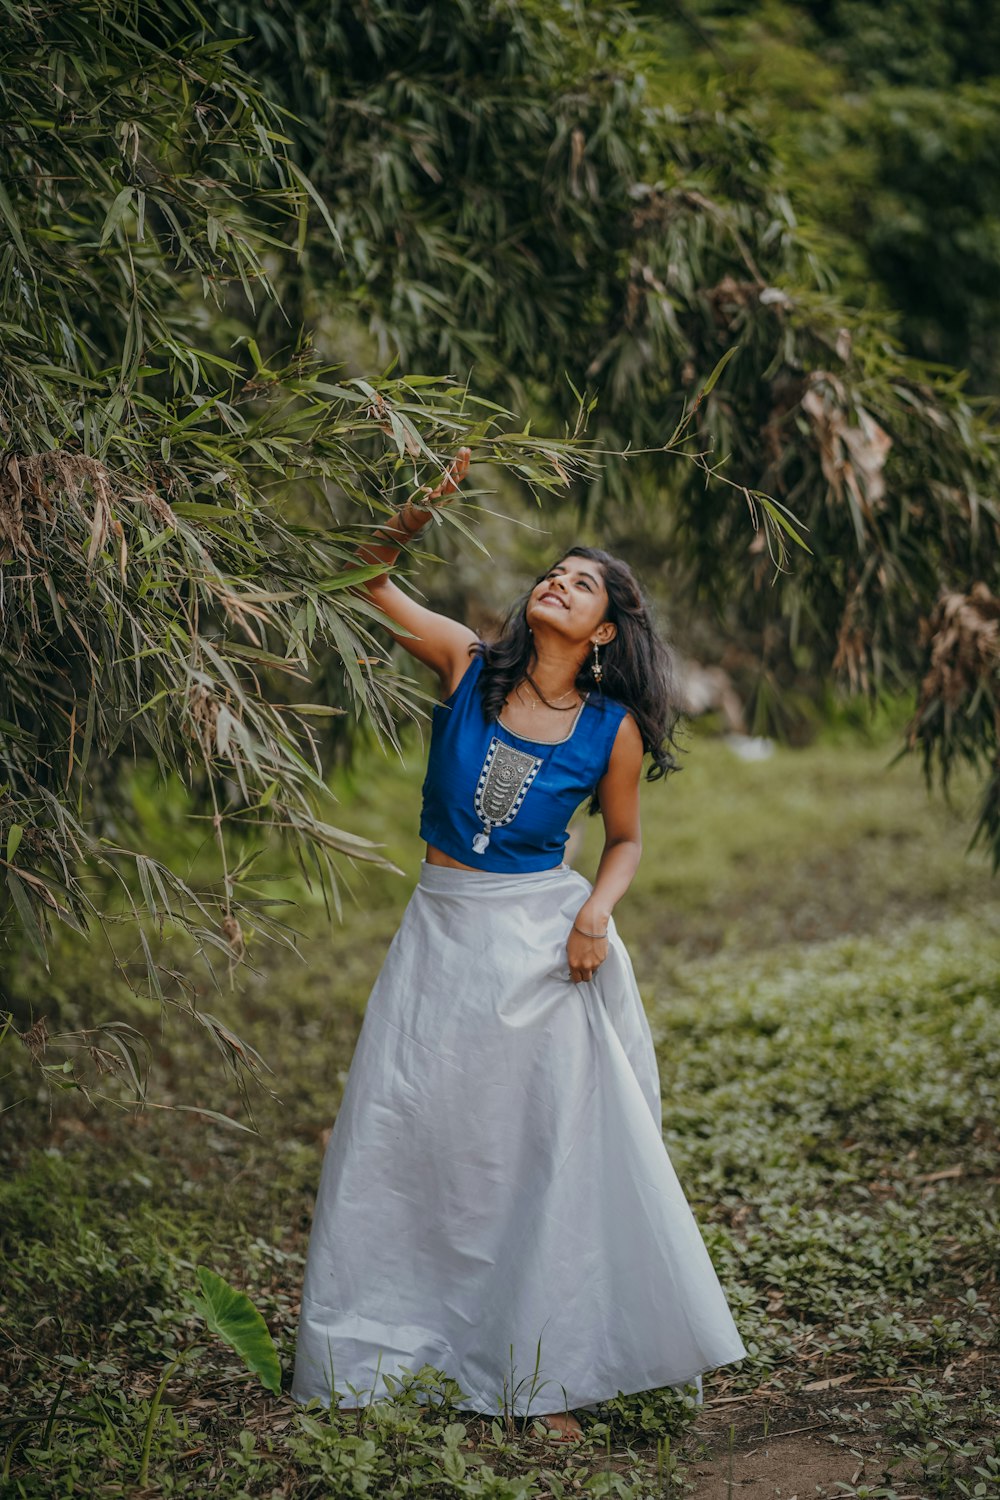 a woman in a white and blue dress standing in a field